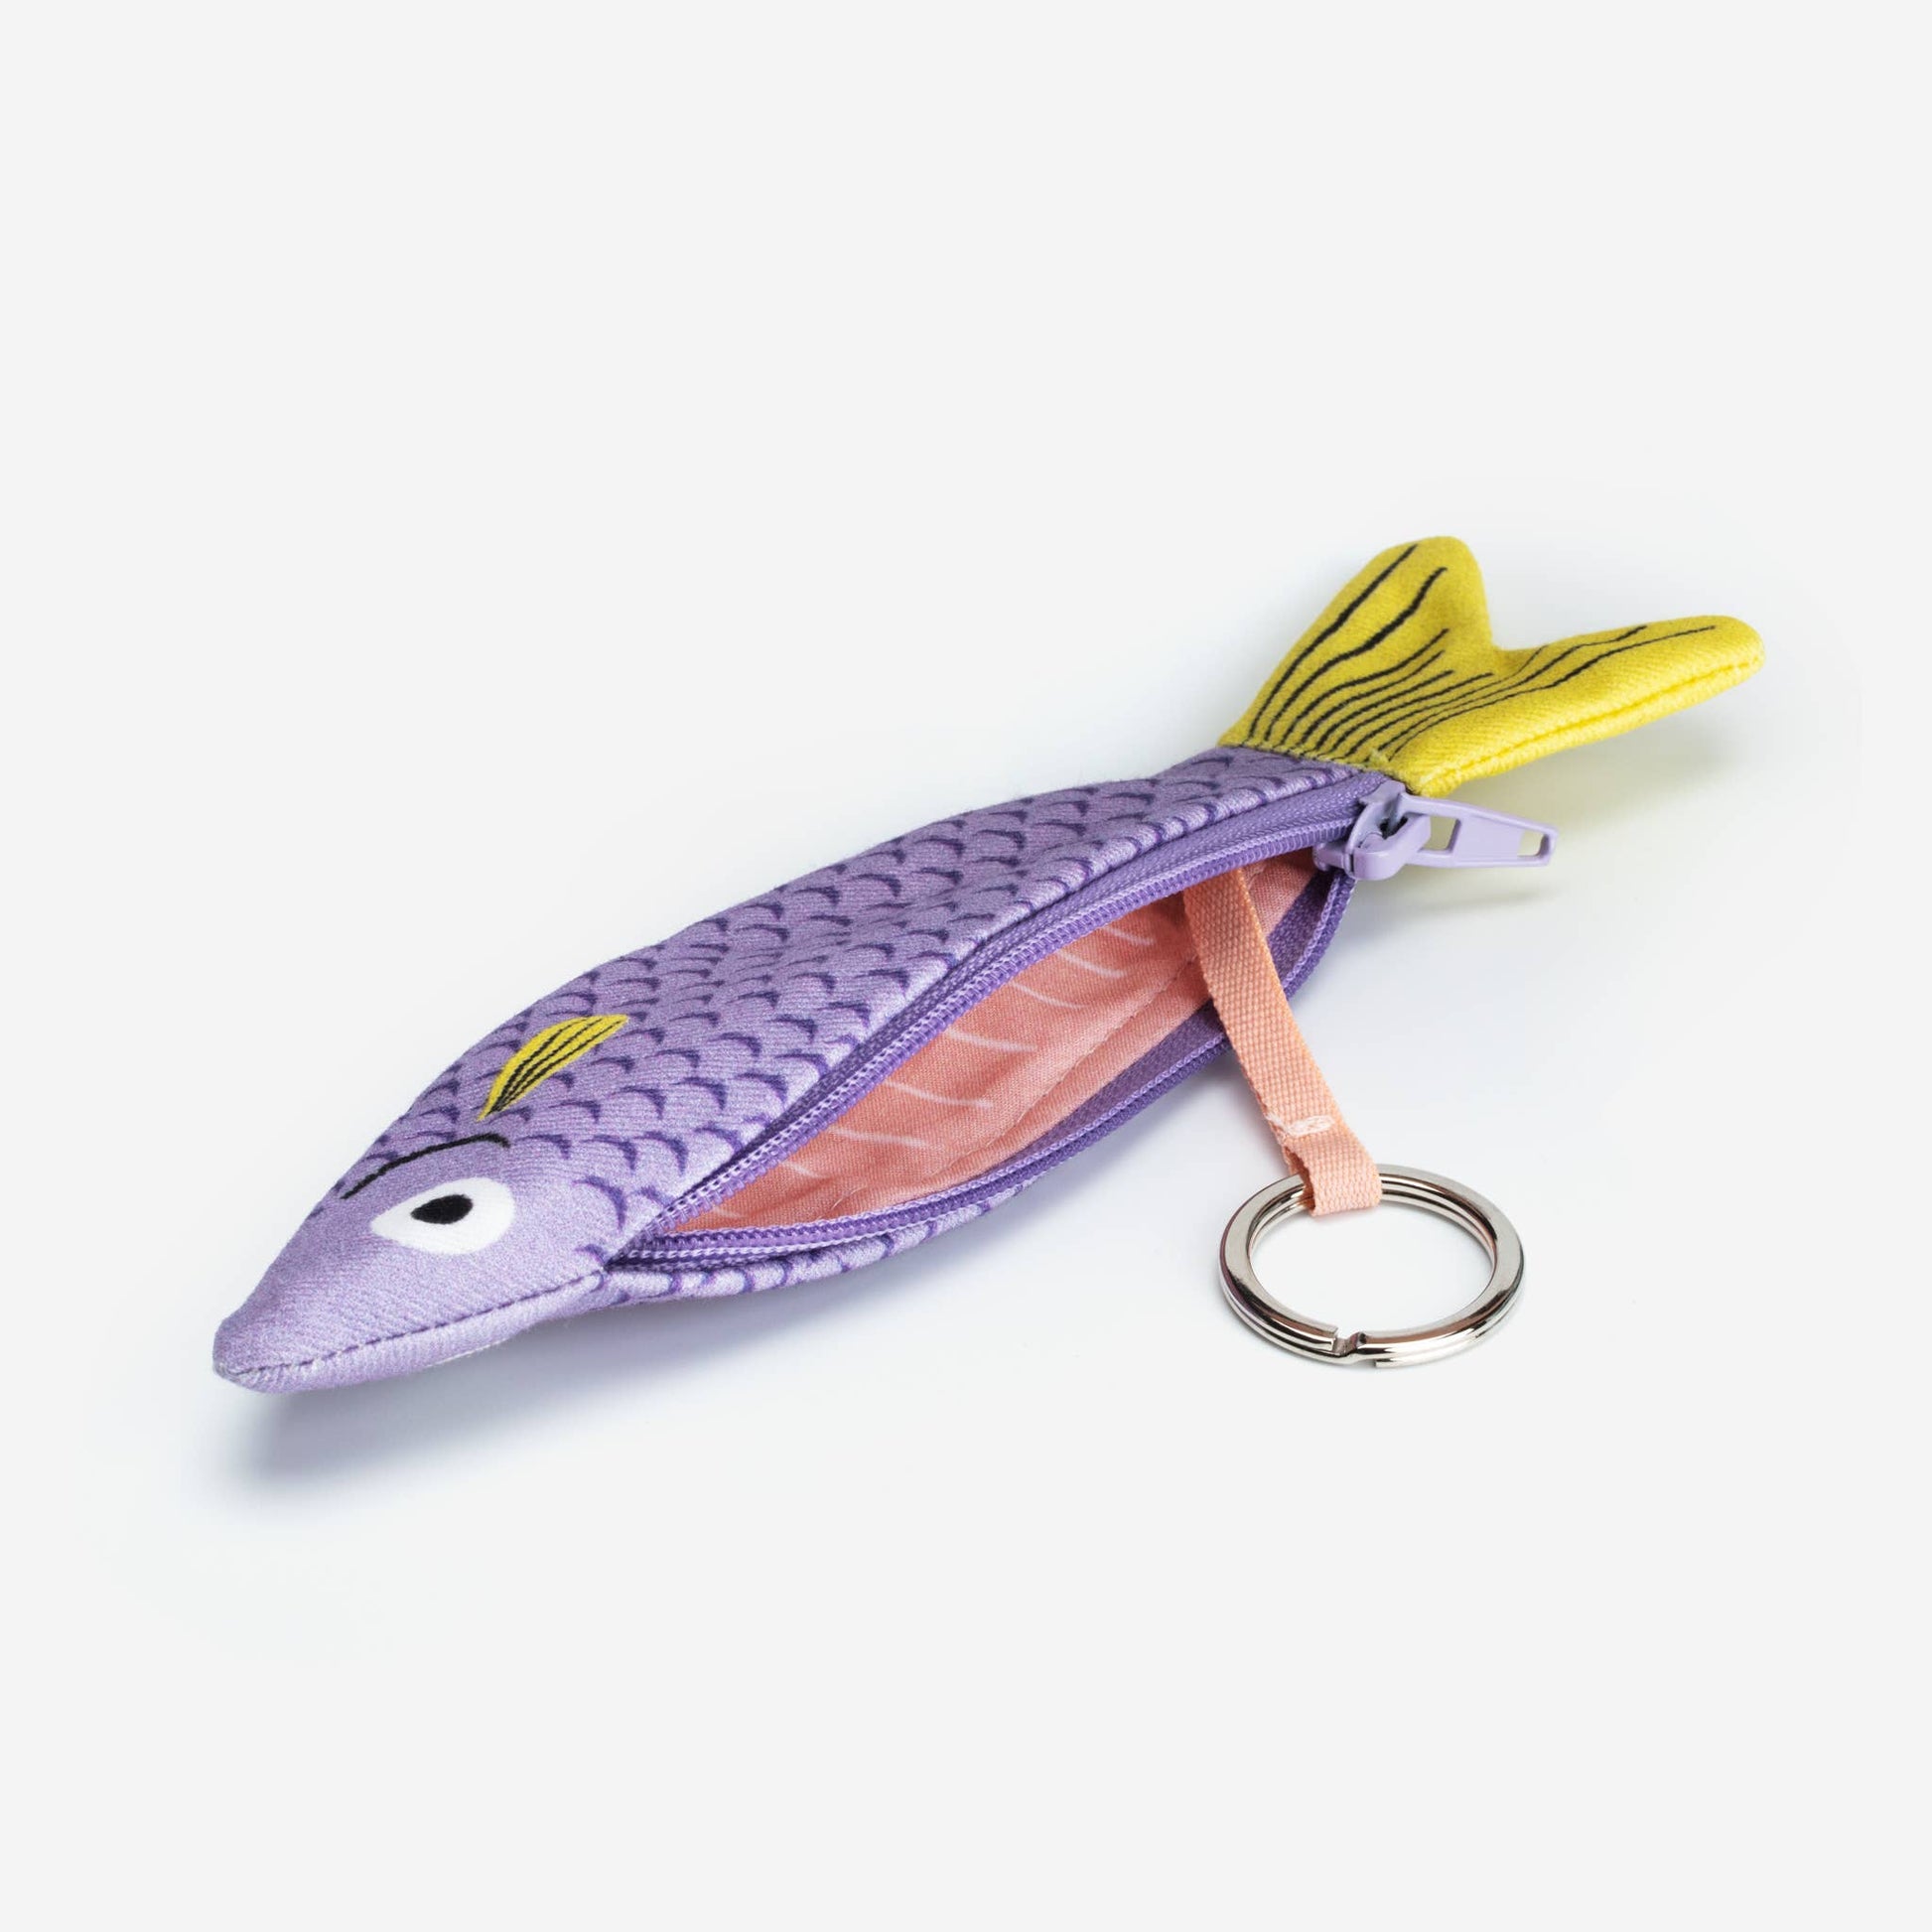 Fish pouch unzippered to show interior + attached keyring